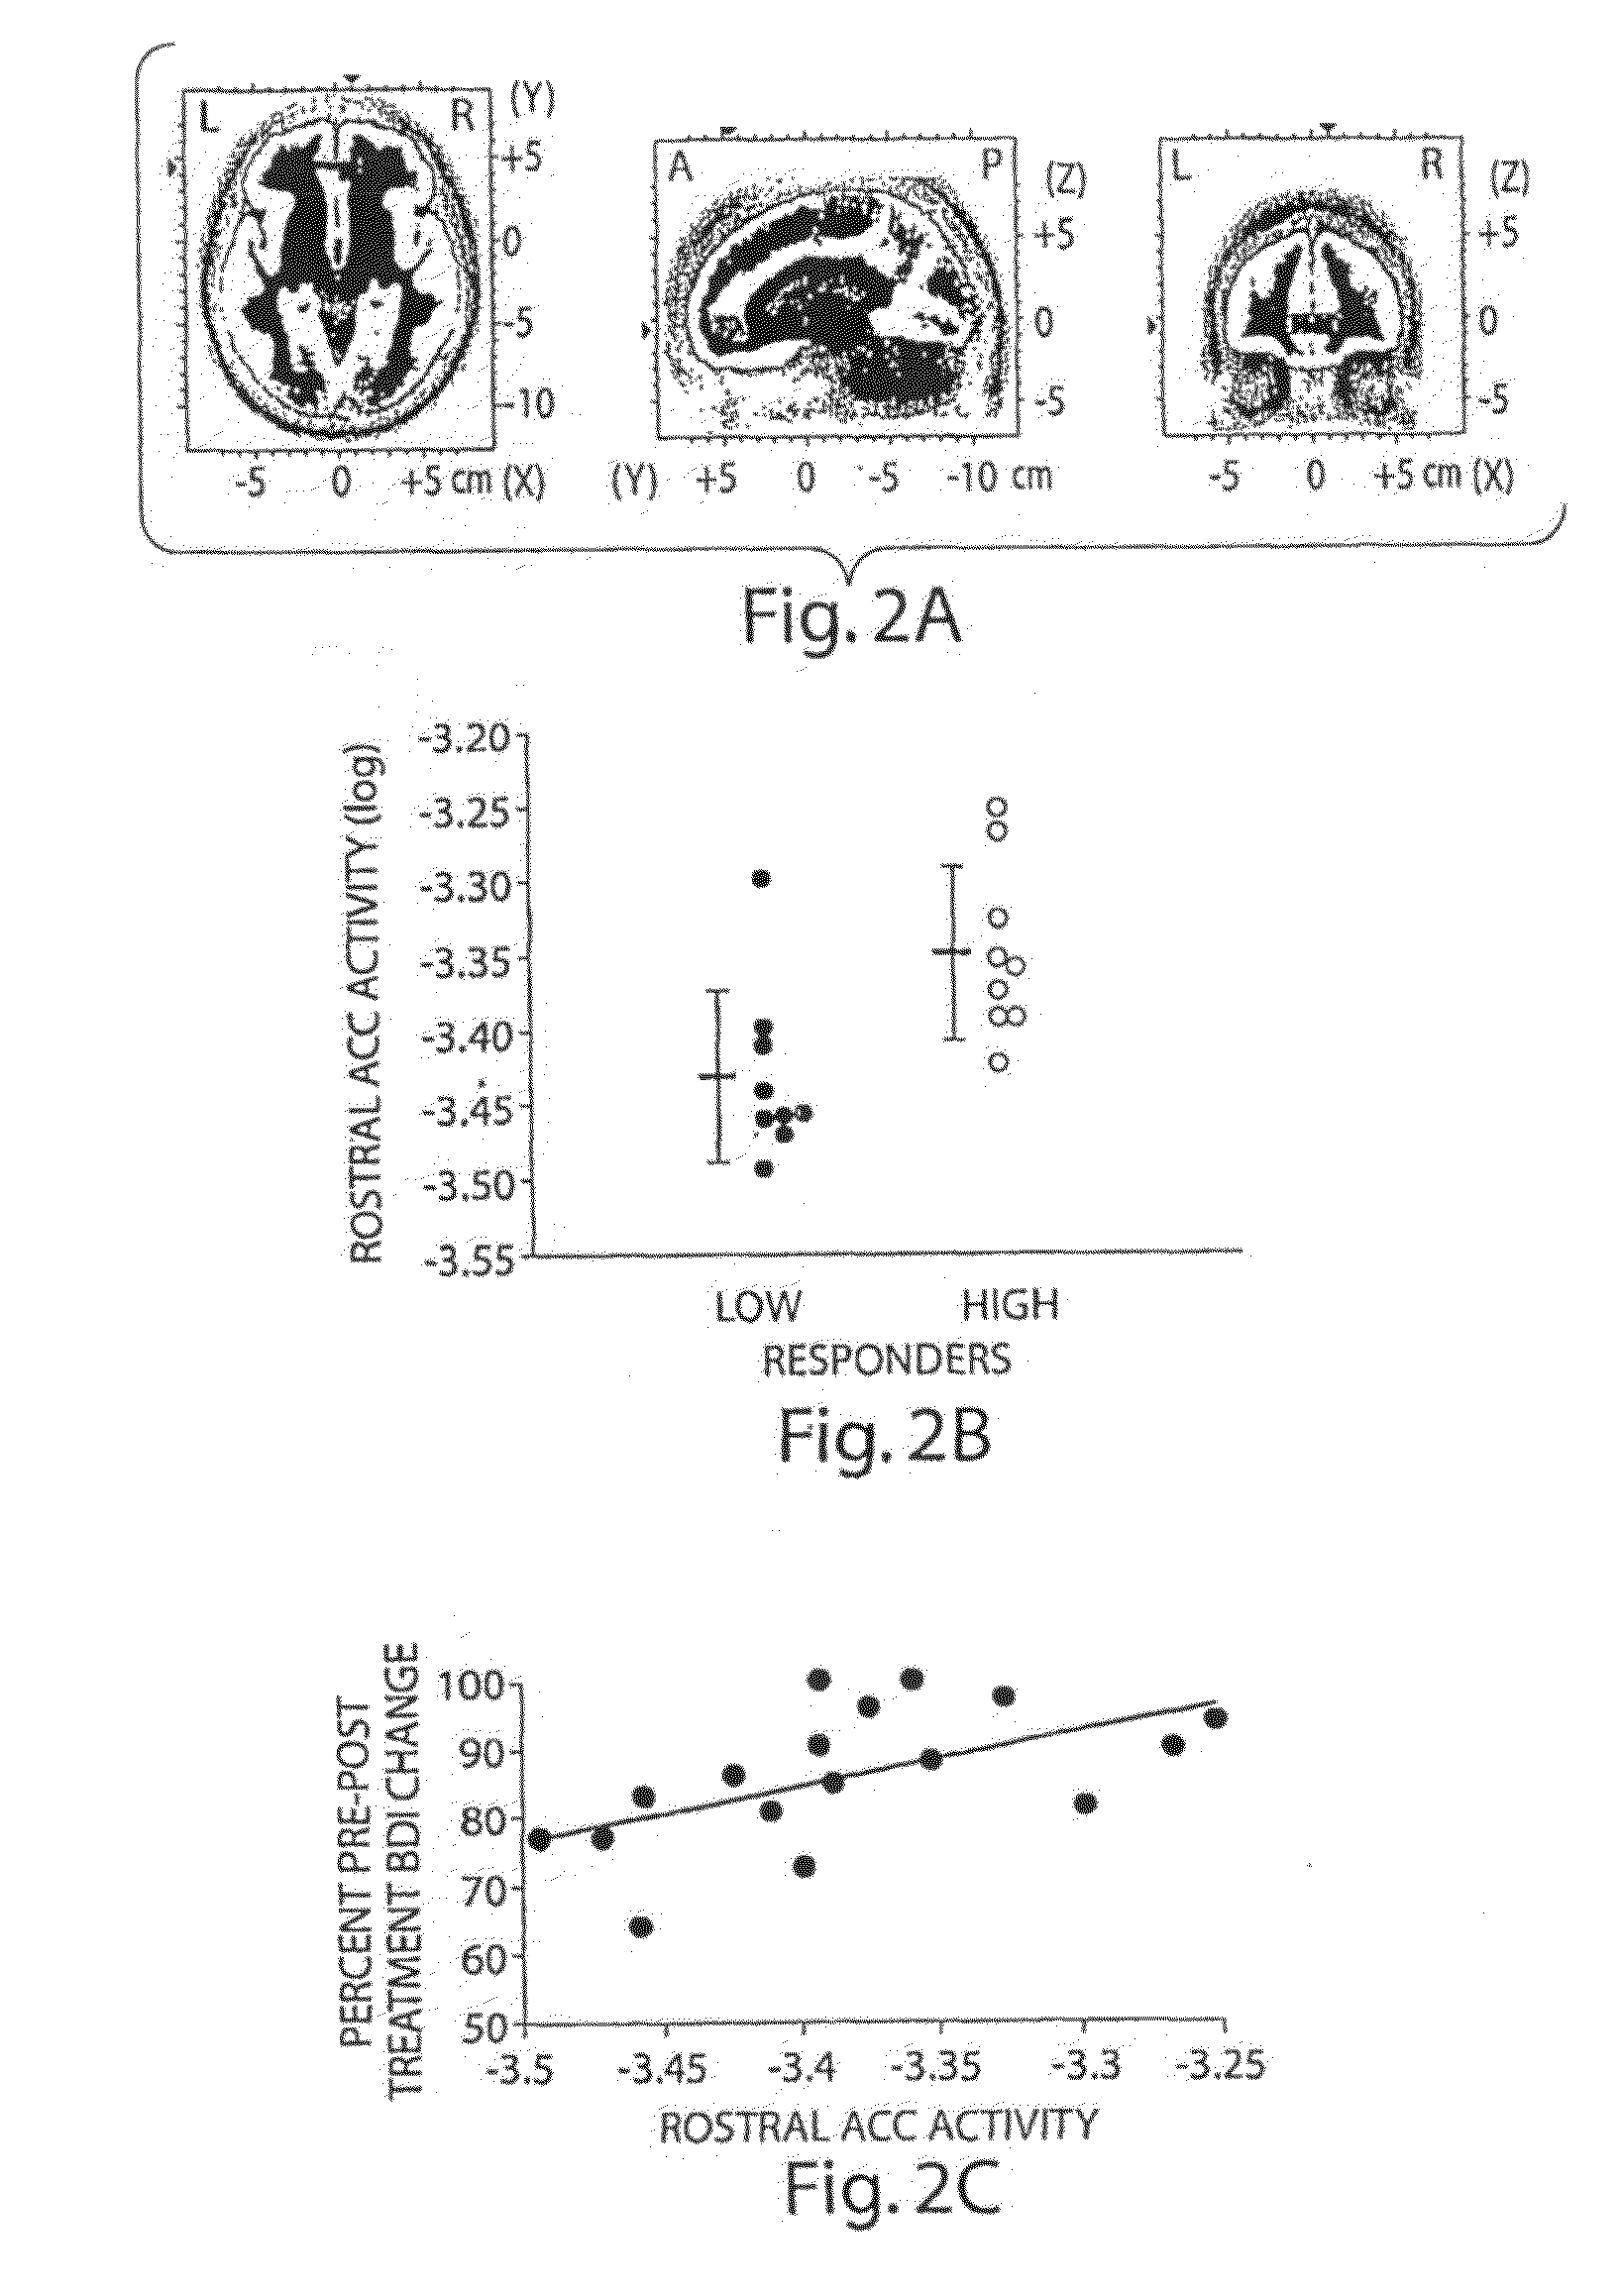 Systems and methods for predicting effectiveness in the treatment of psychiatric disorders, including depression